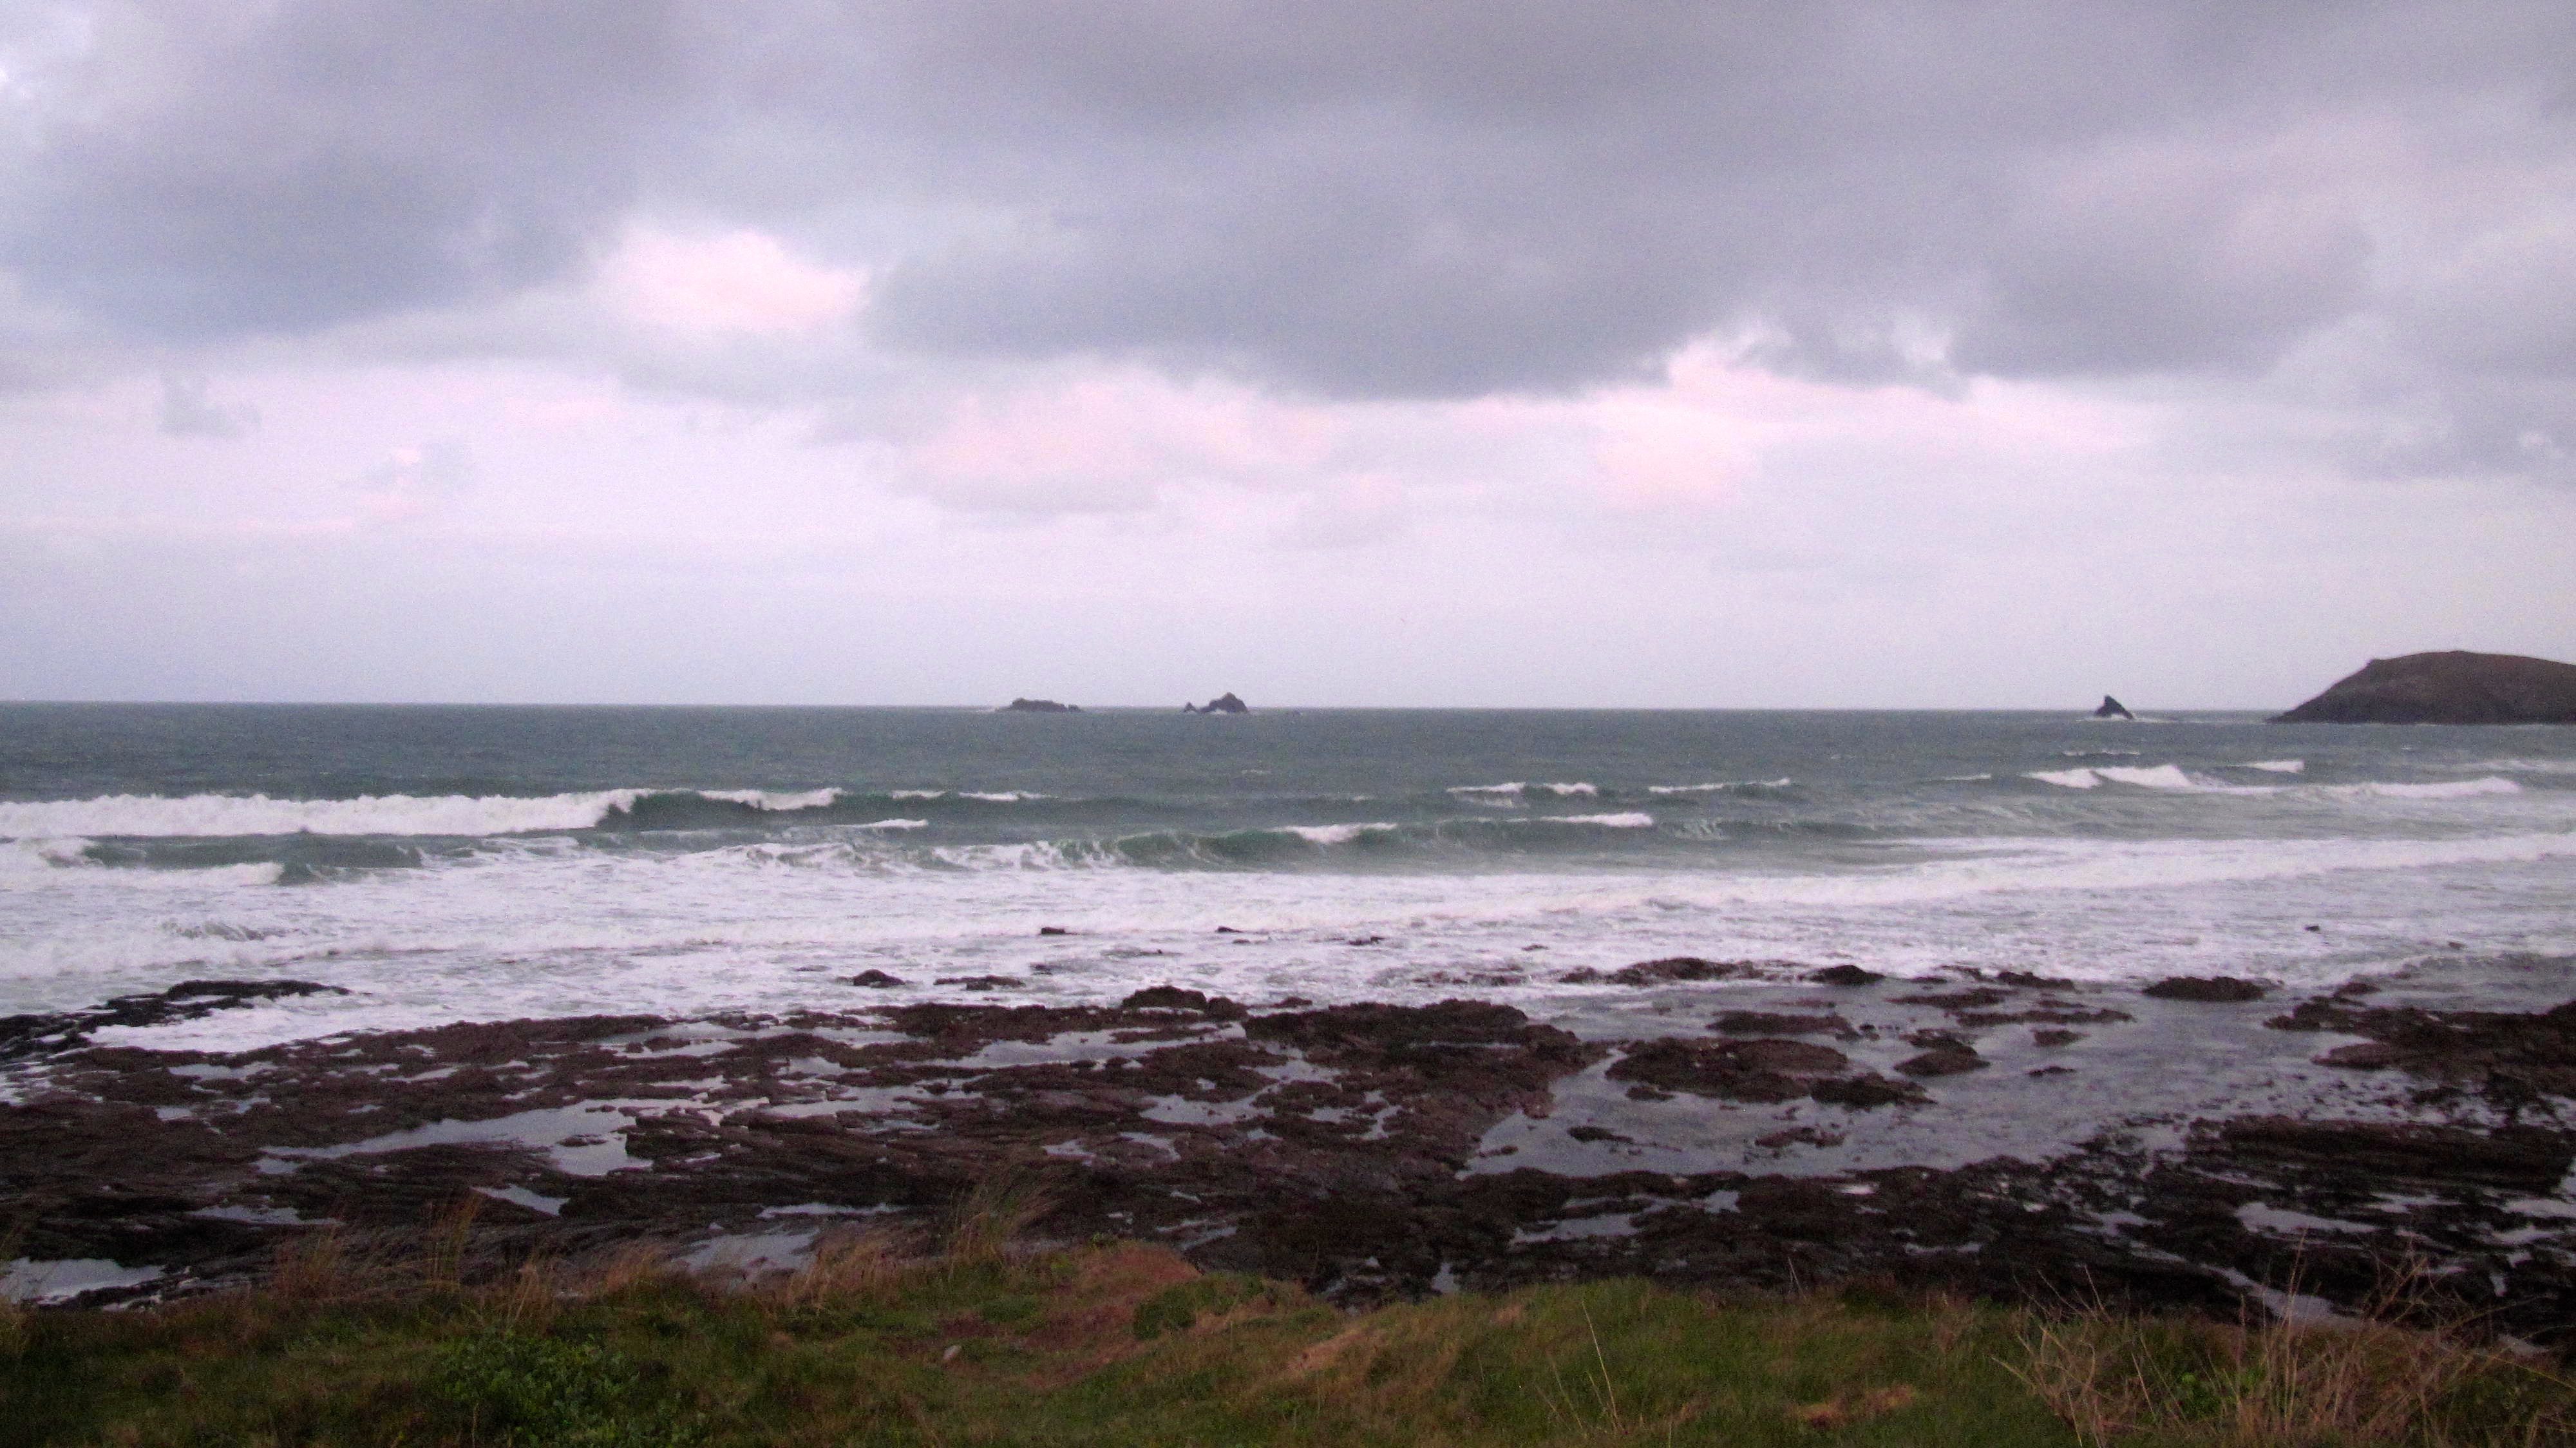 Surf Report for Wednesday 22nd October 2014